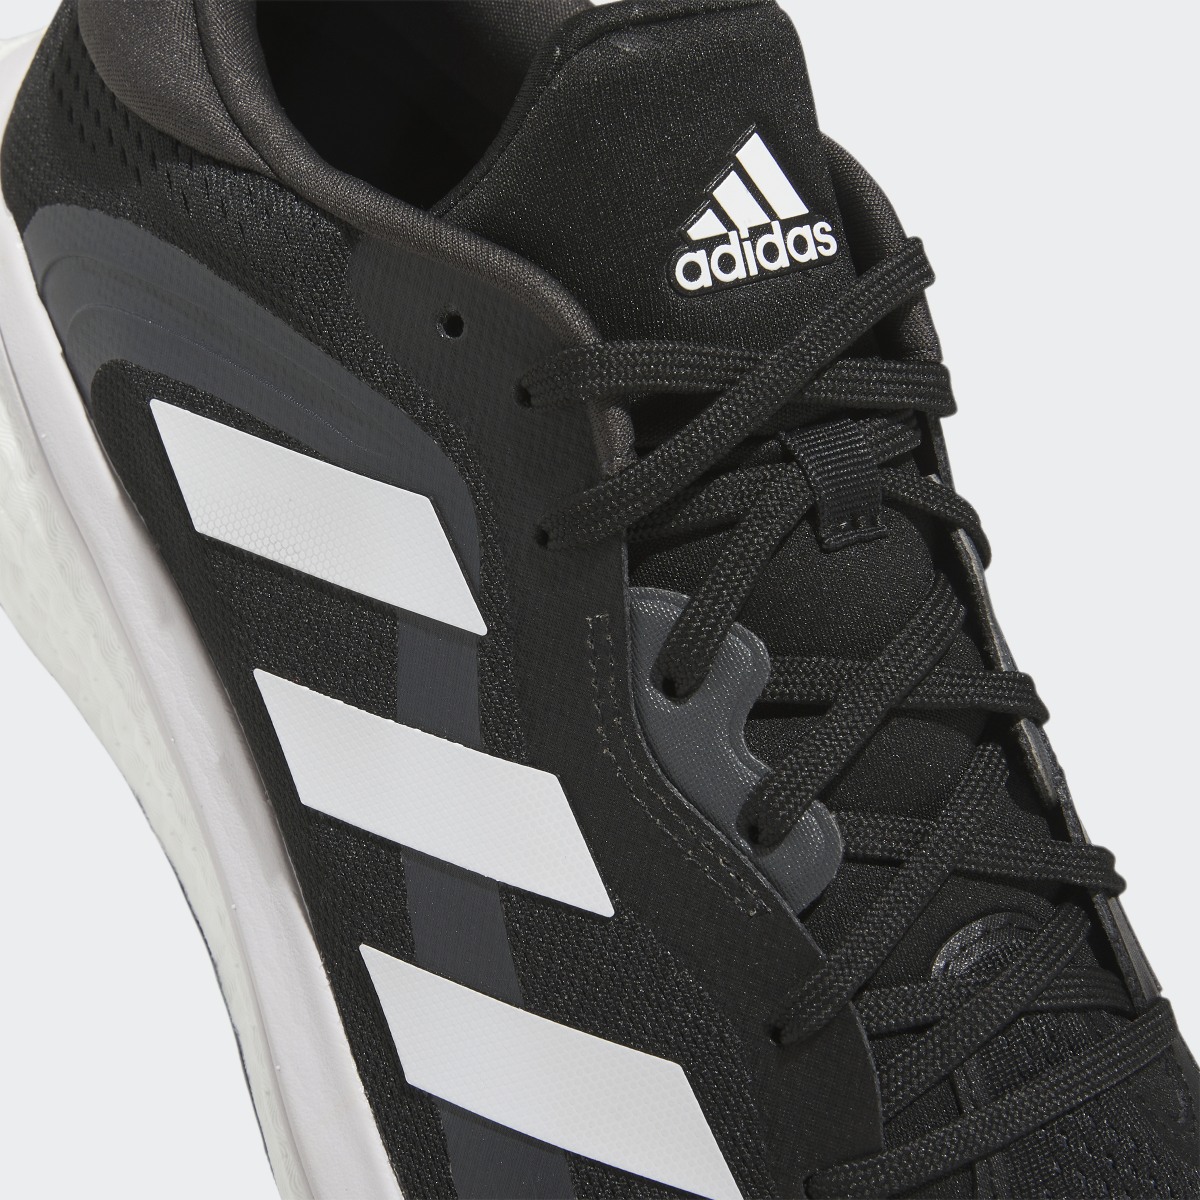 Adidas SolarGlide 4 ST Shoes. 5